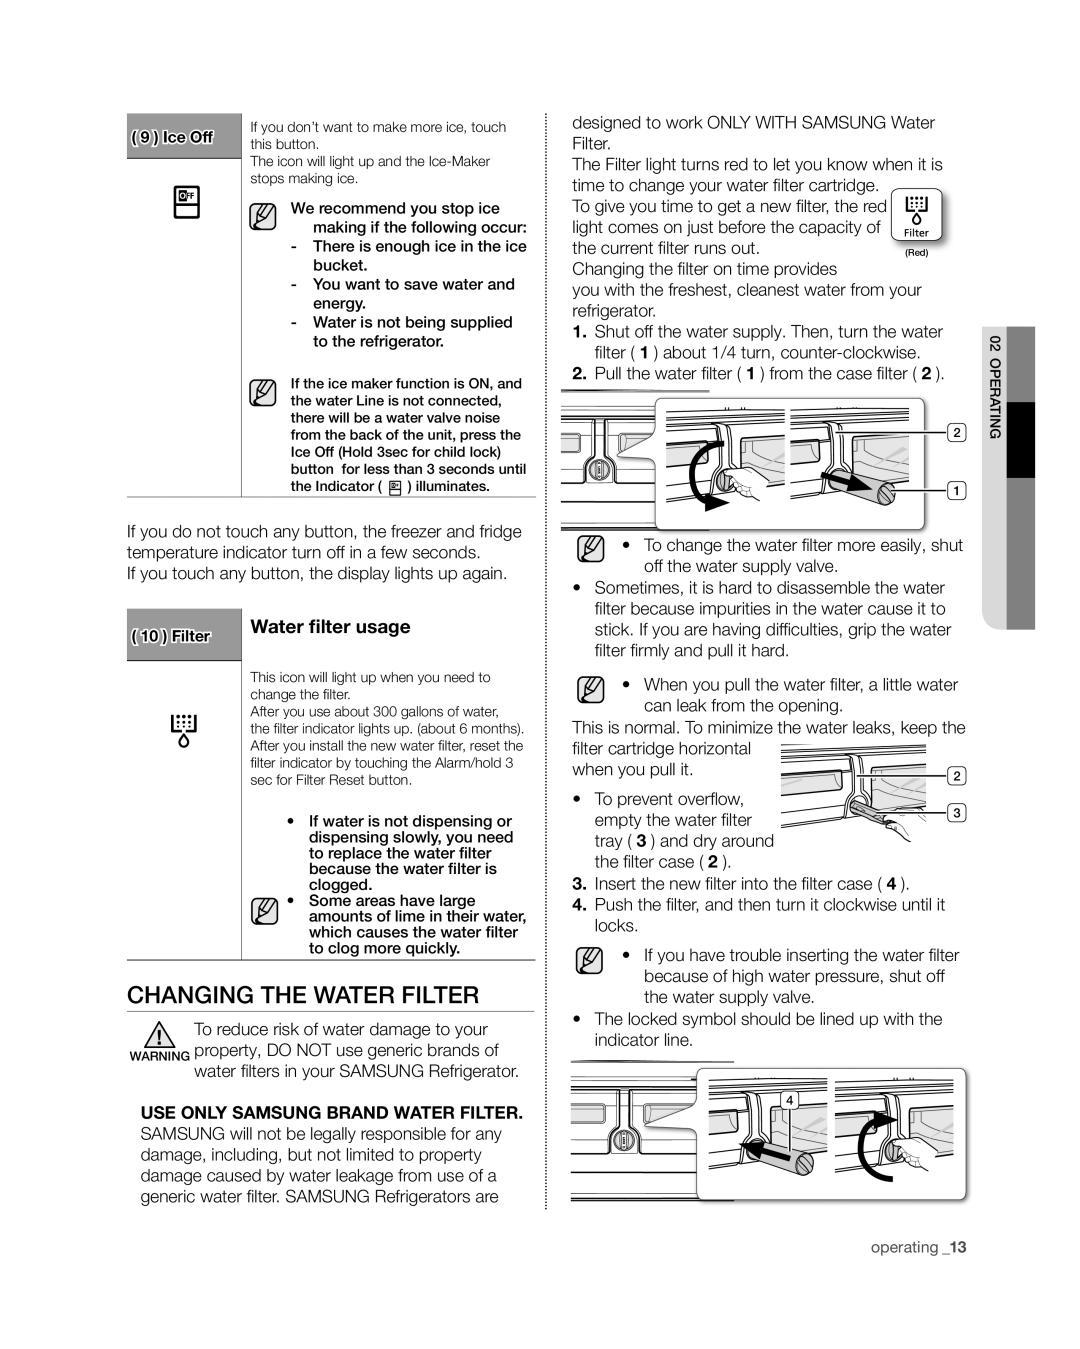 Samsung RF4267HA user manual Changing the water filter, Water filter usage 